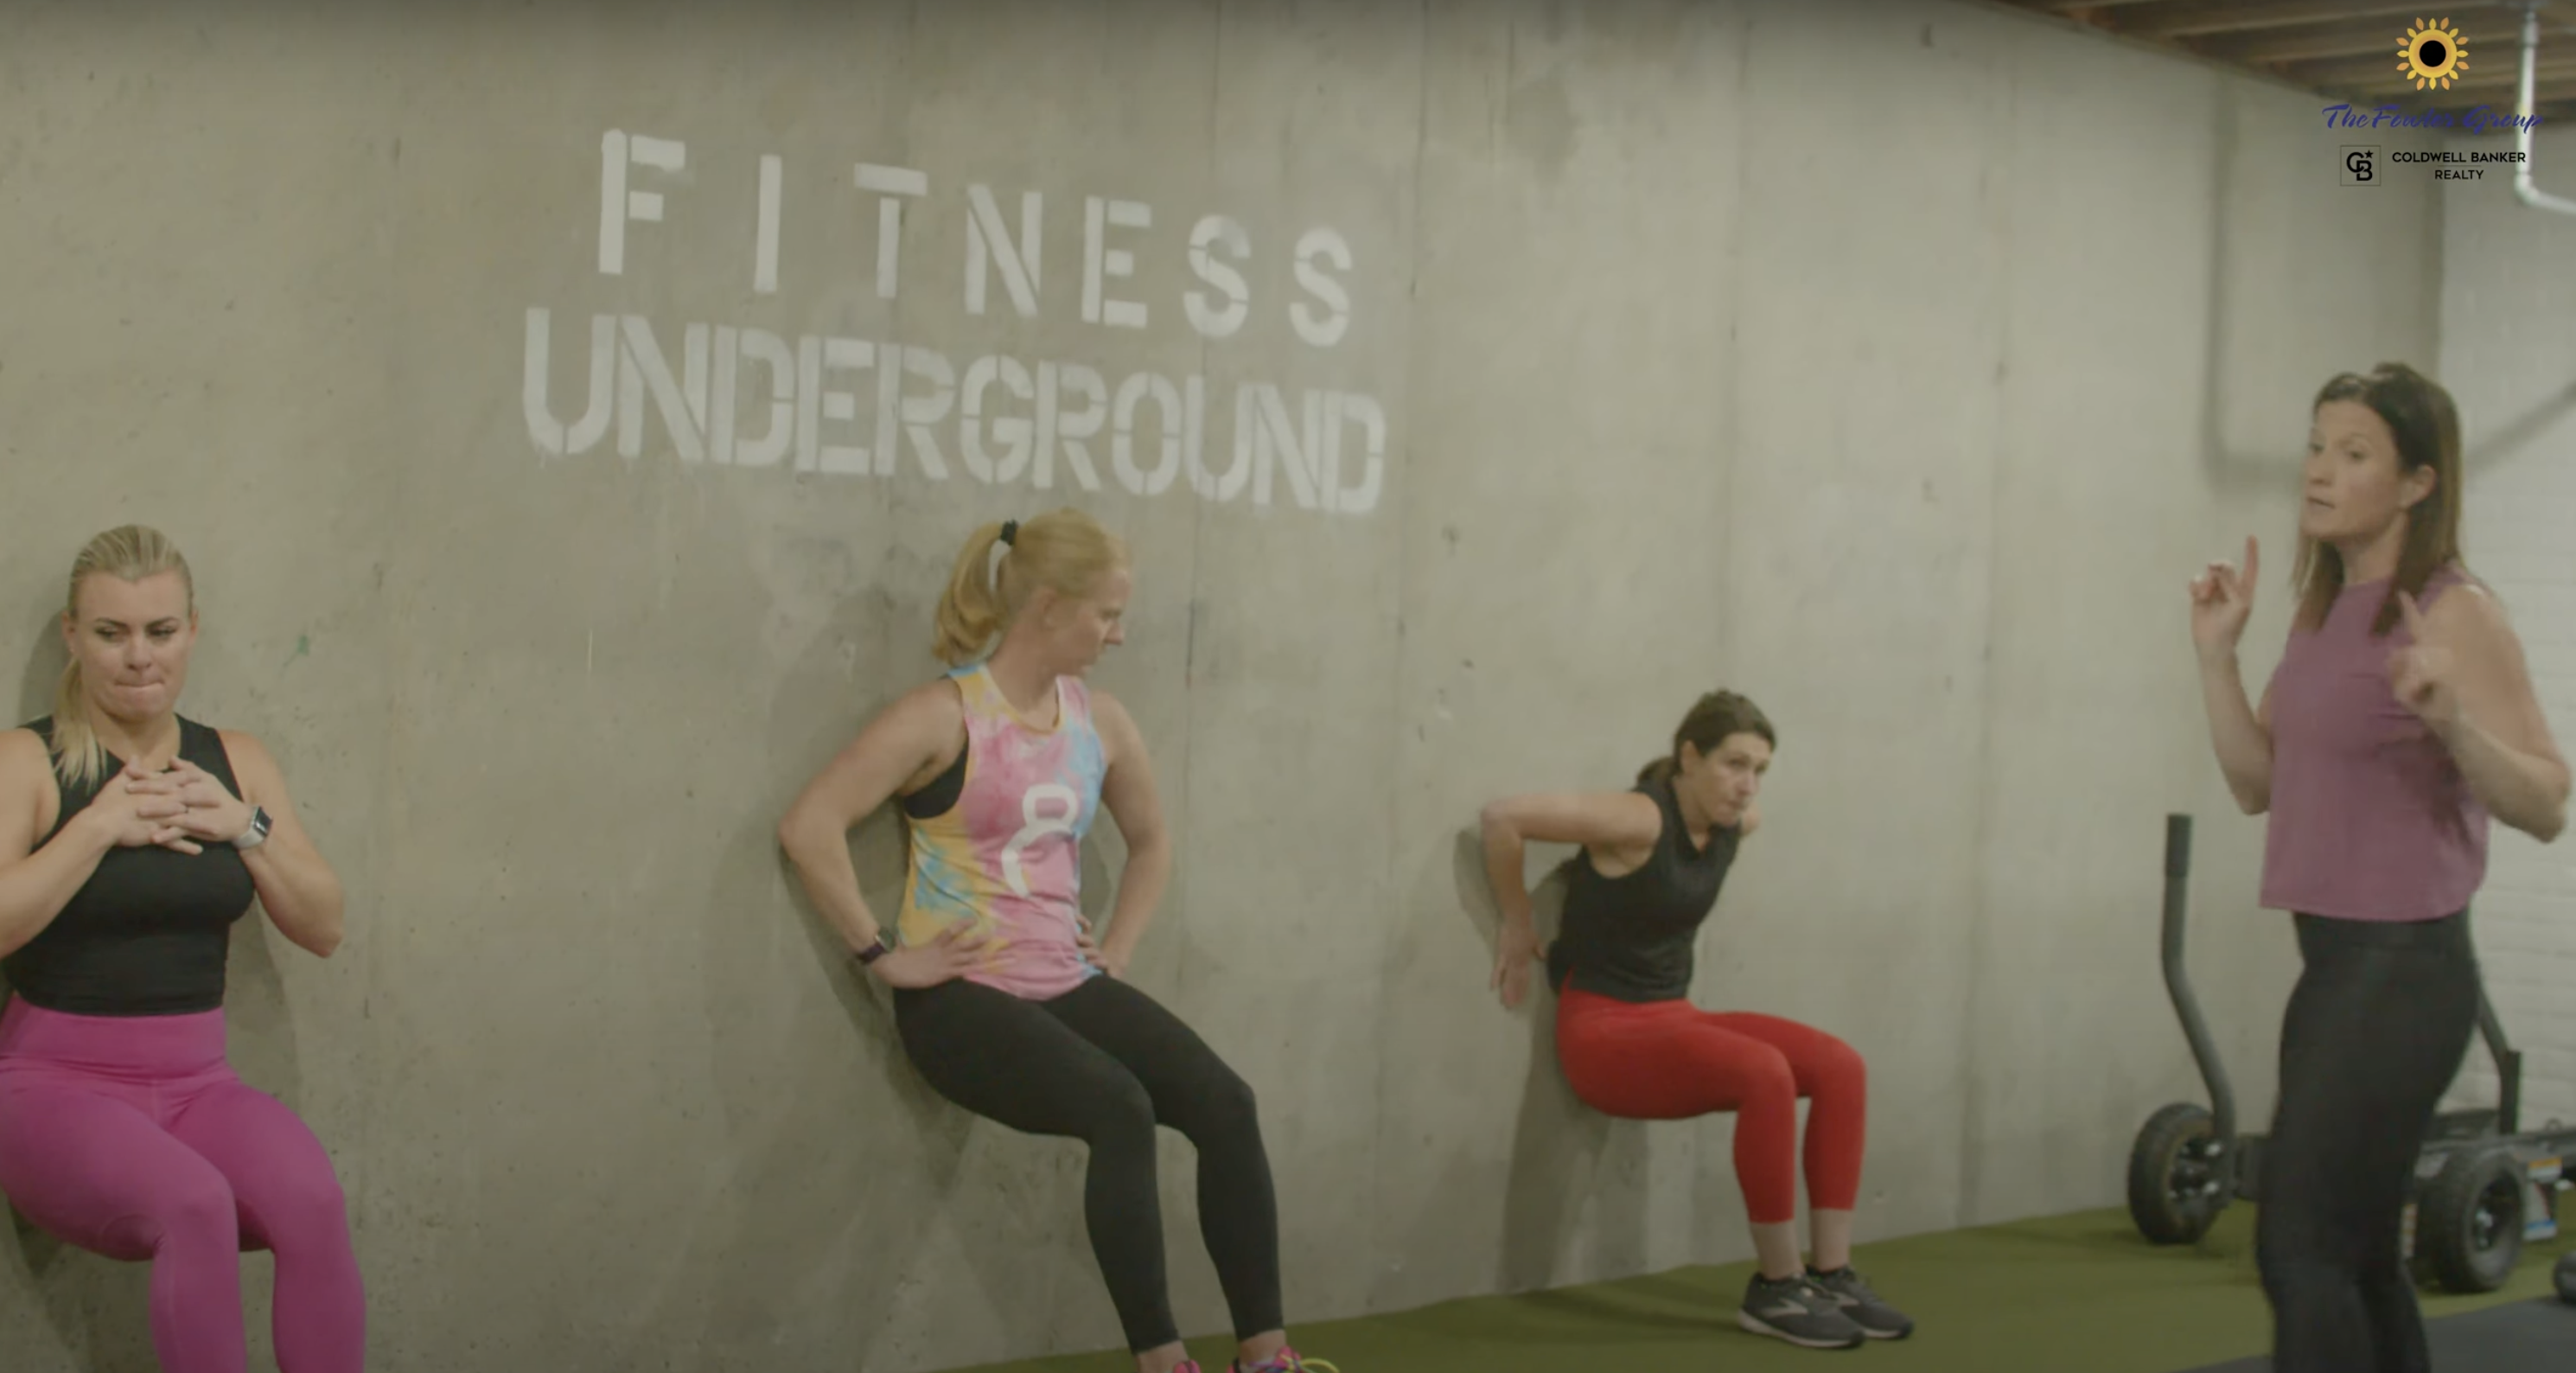 Experience Erie with Fitness Underground